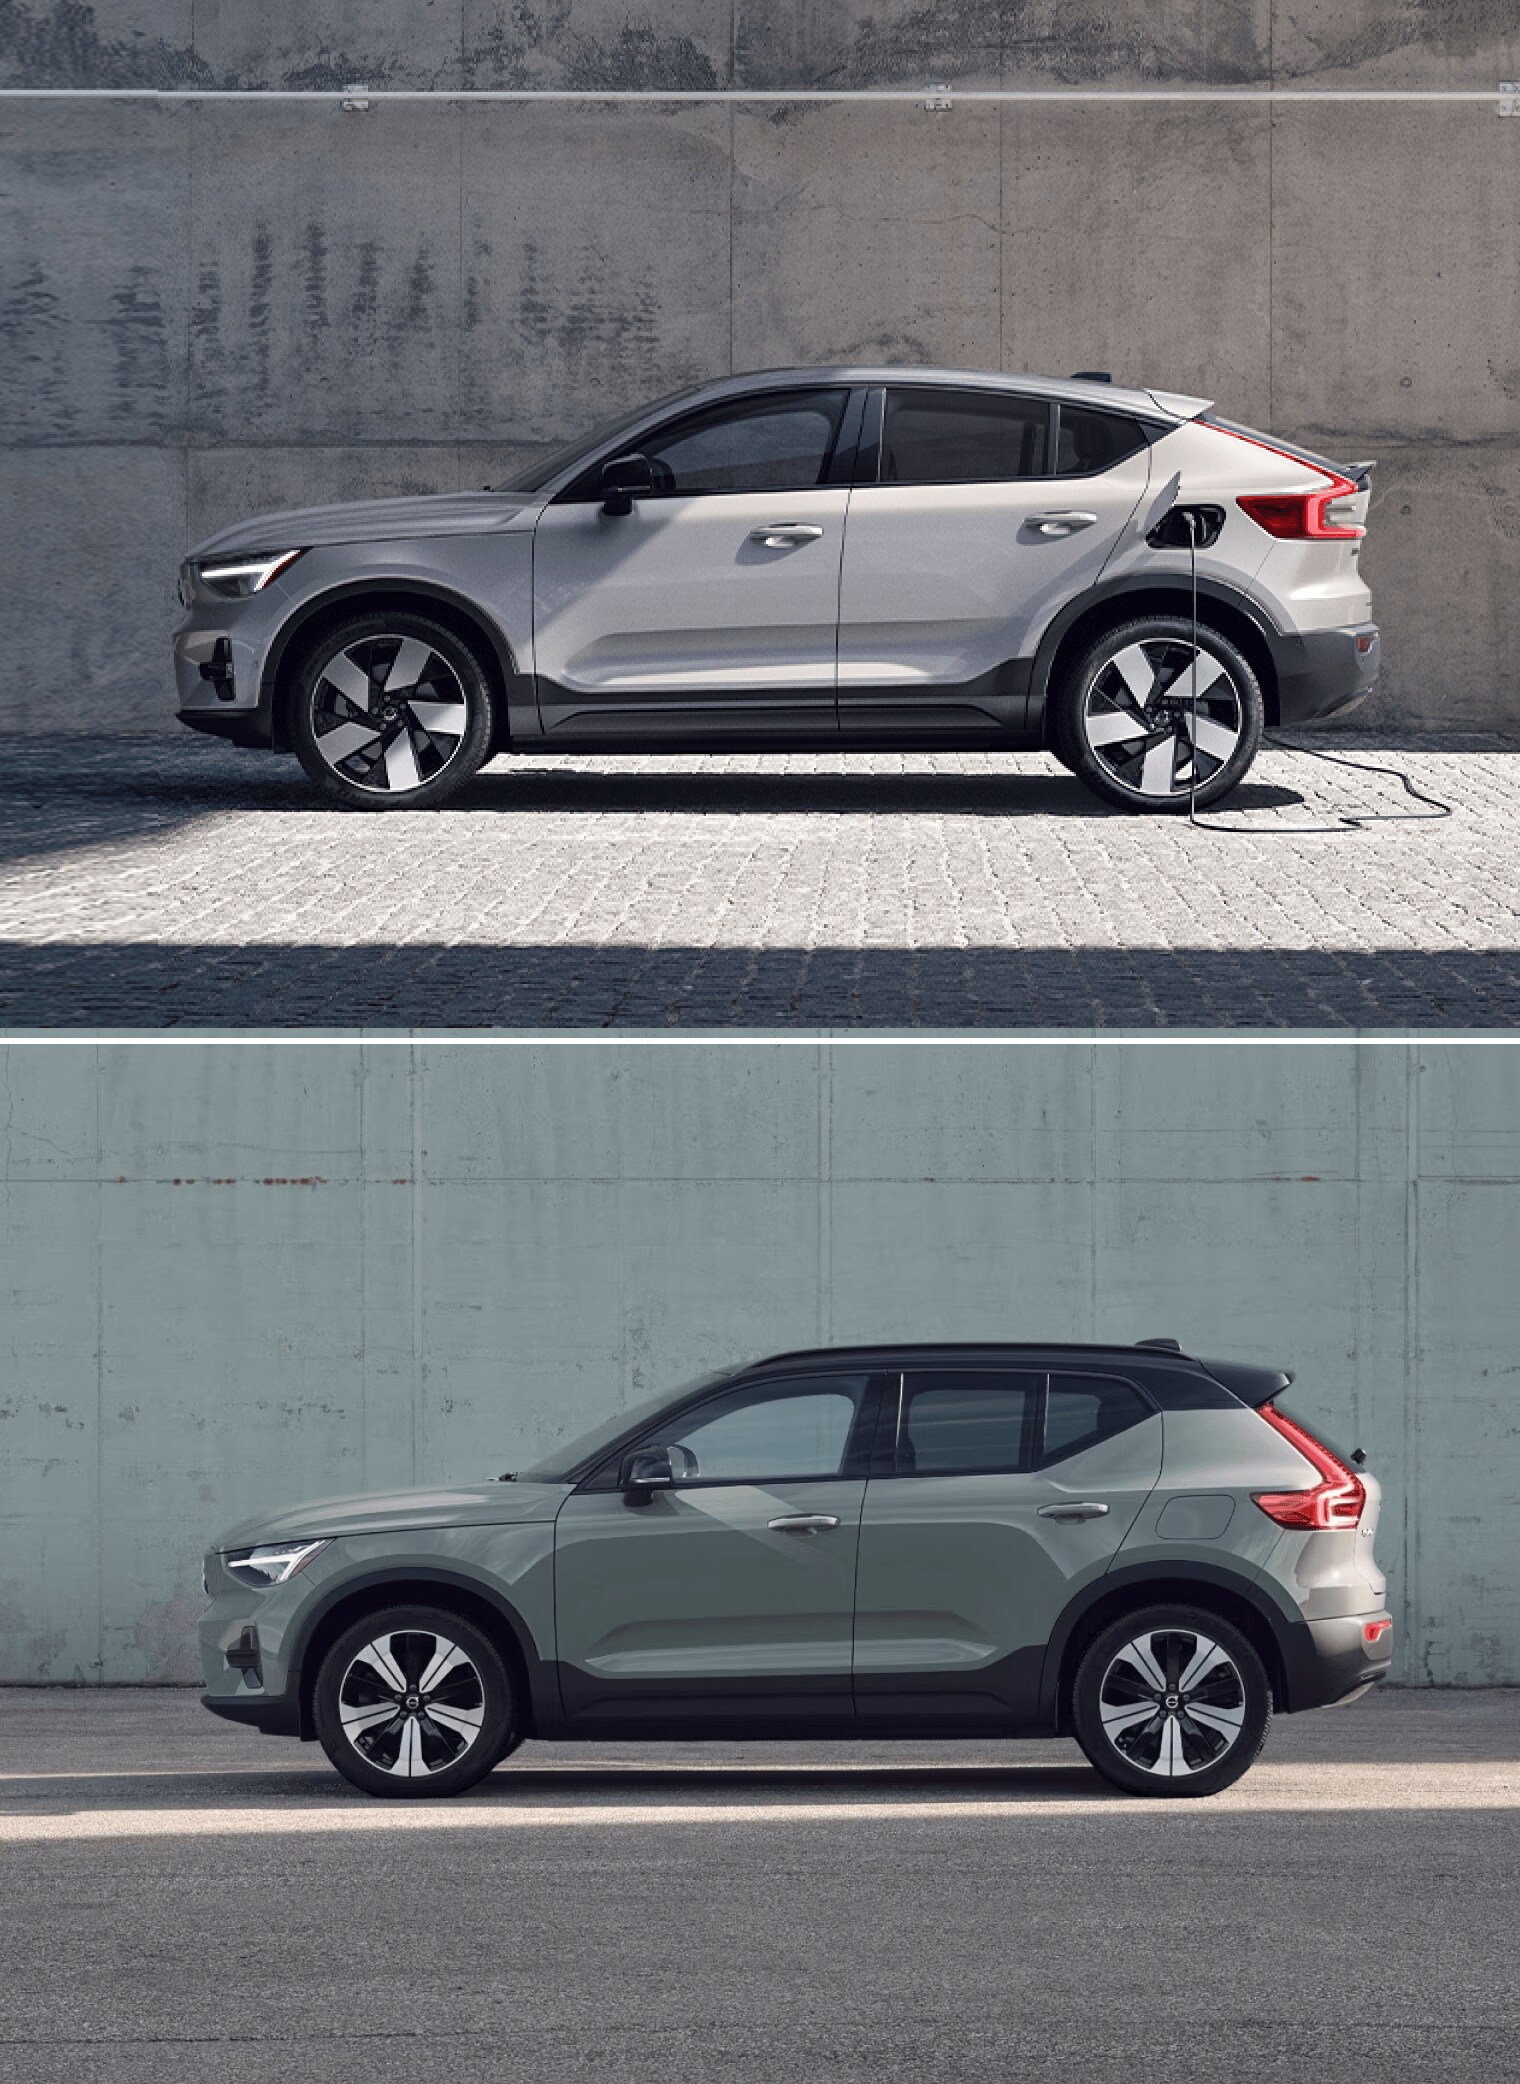 Volvo C40 Vs. Volvo XC40 Recharge: What Are The Differences?